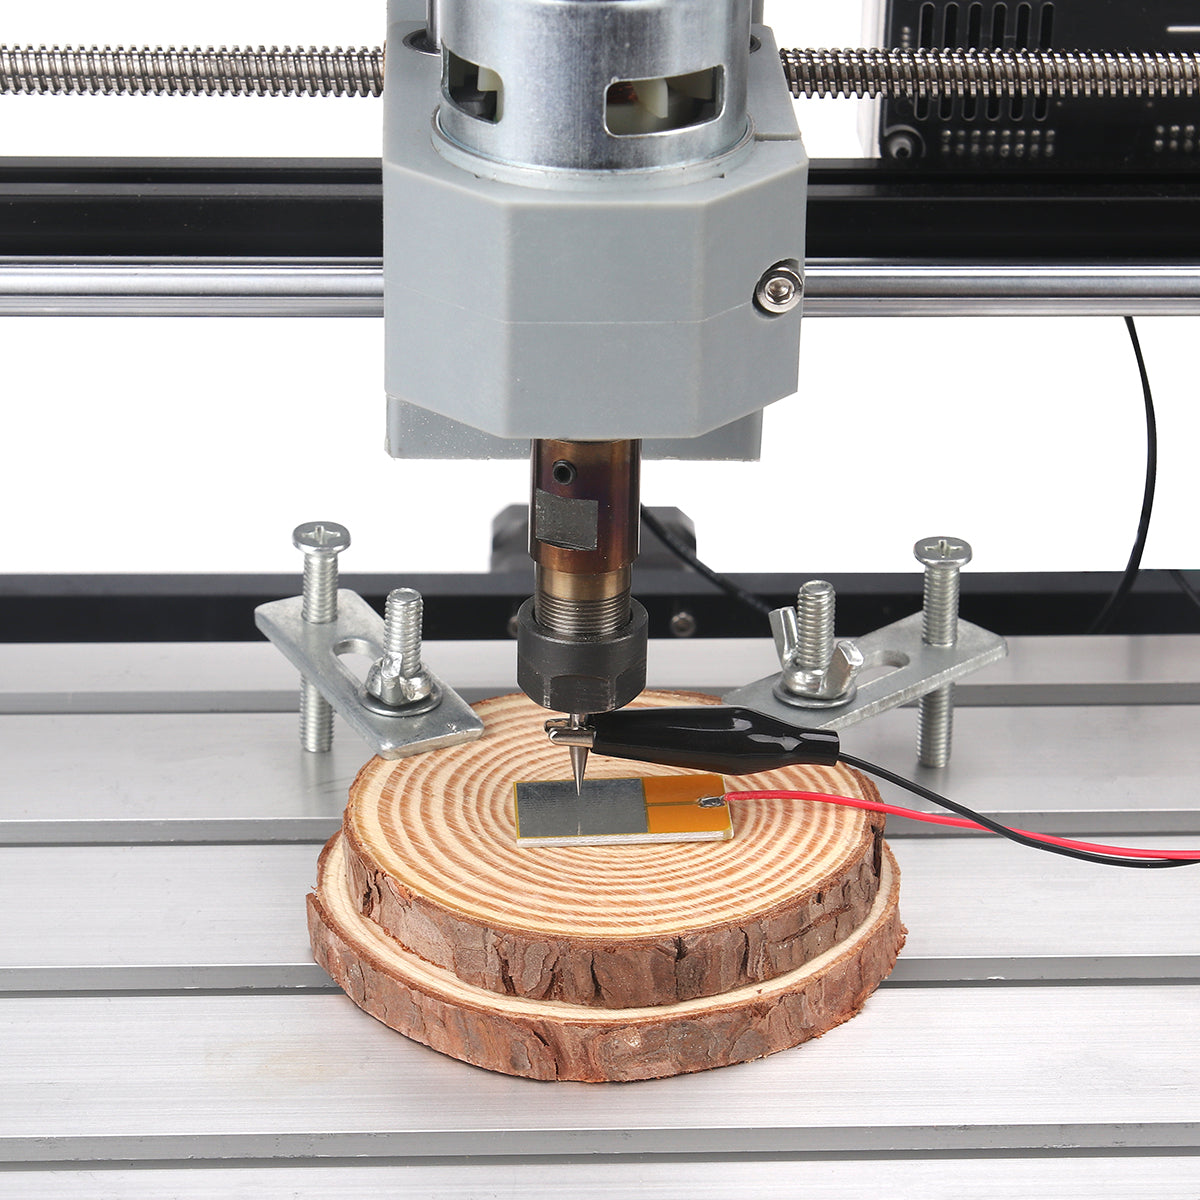 iklestar™ CNC Router Z-Axis Tool Setting Touch Probe